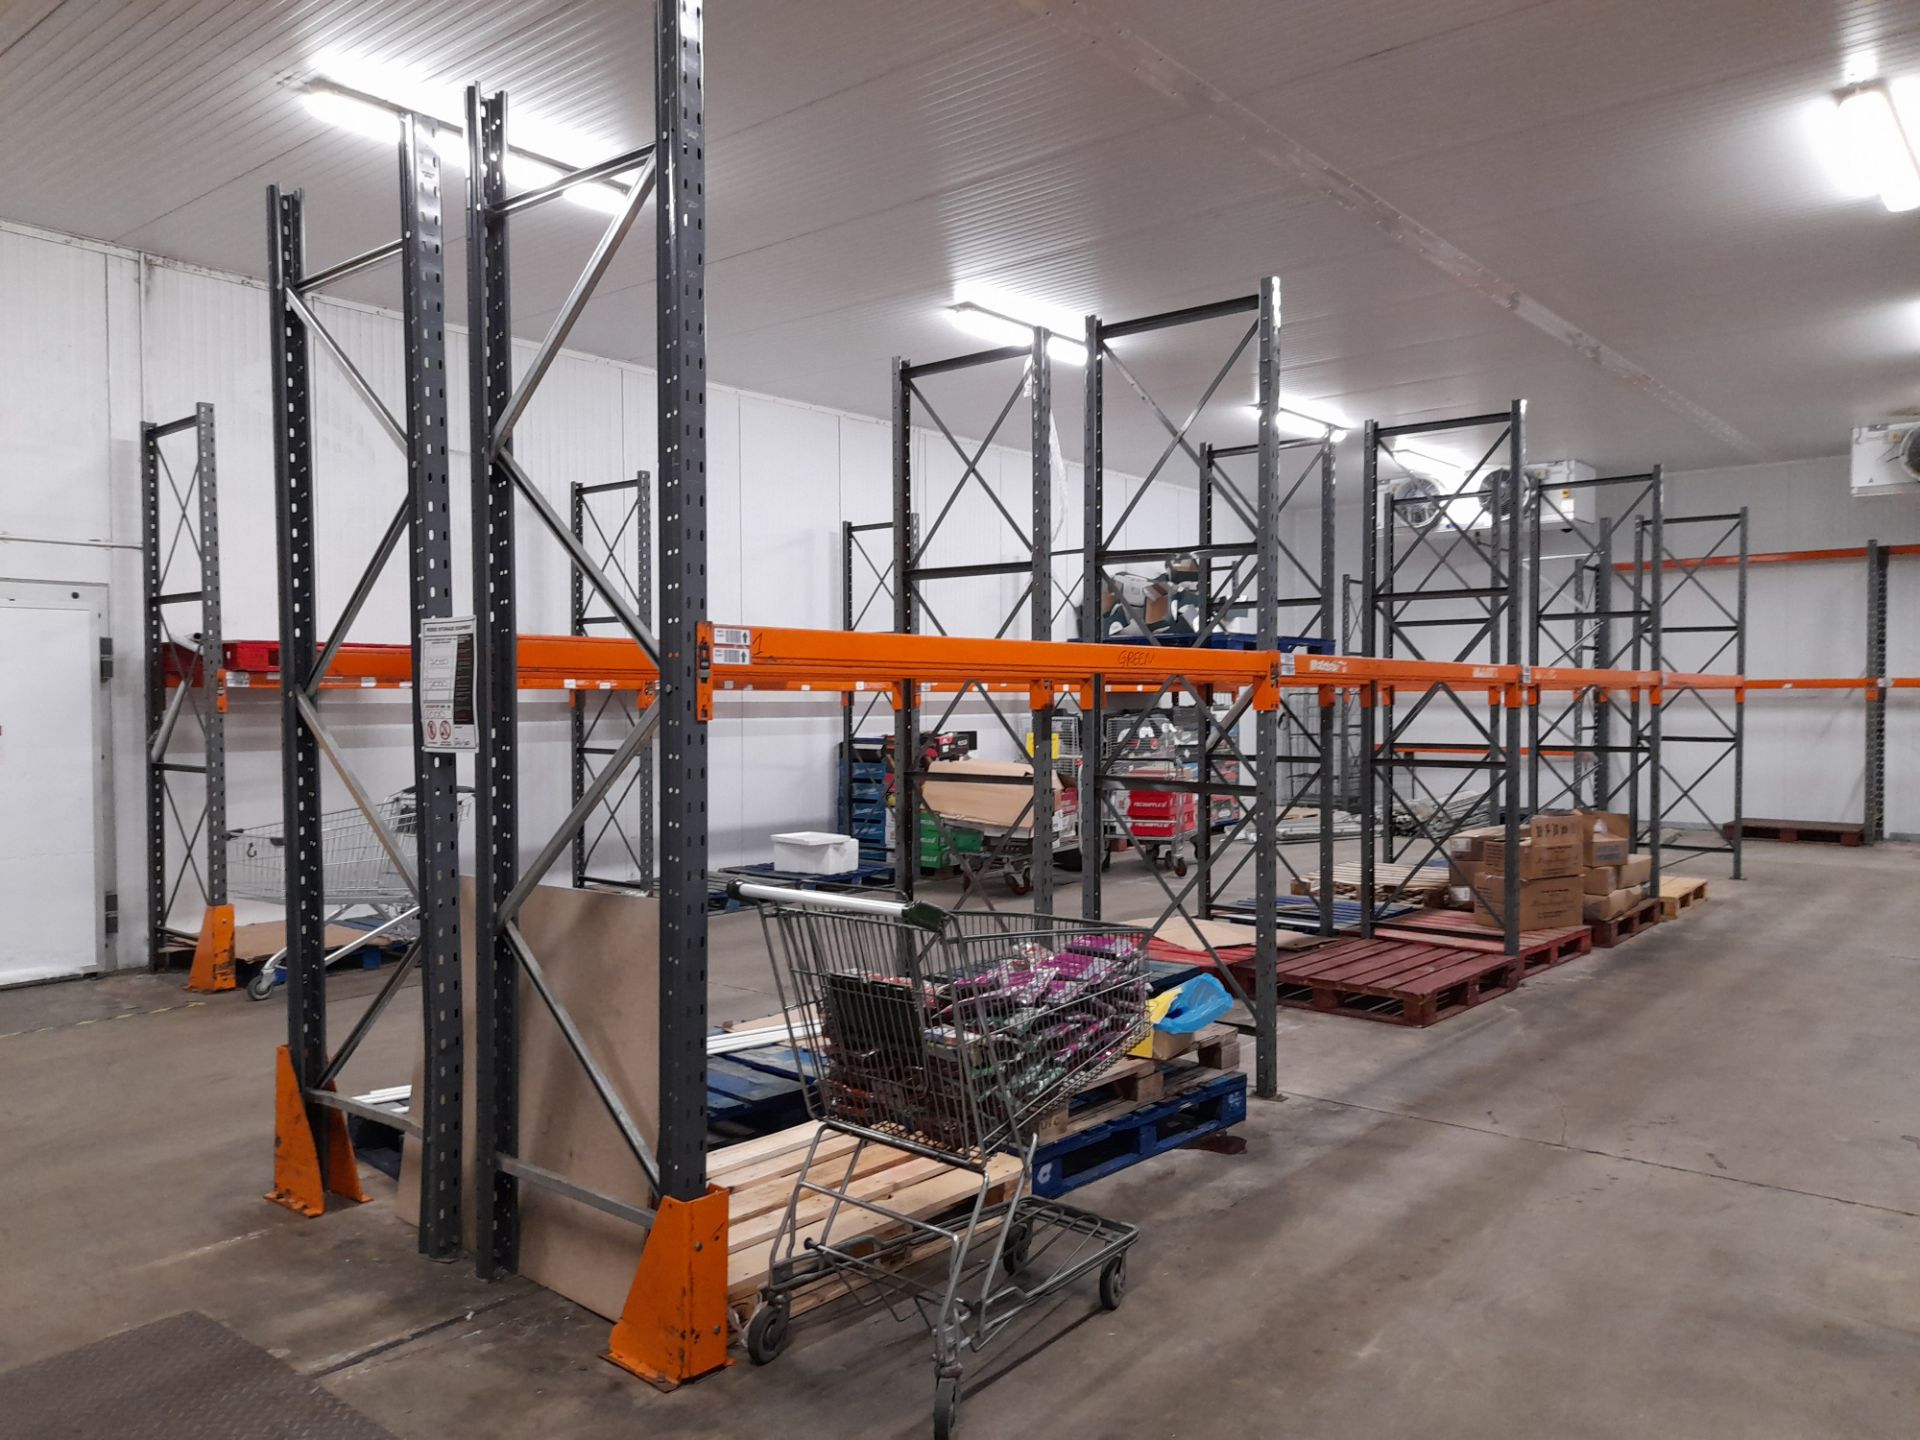 22 Bays of various 3m high pallet racking (Room 8 – Chill room – please note that you may be